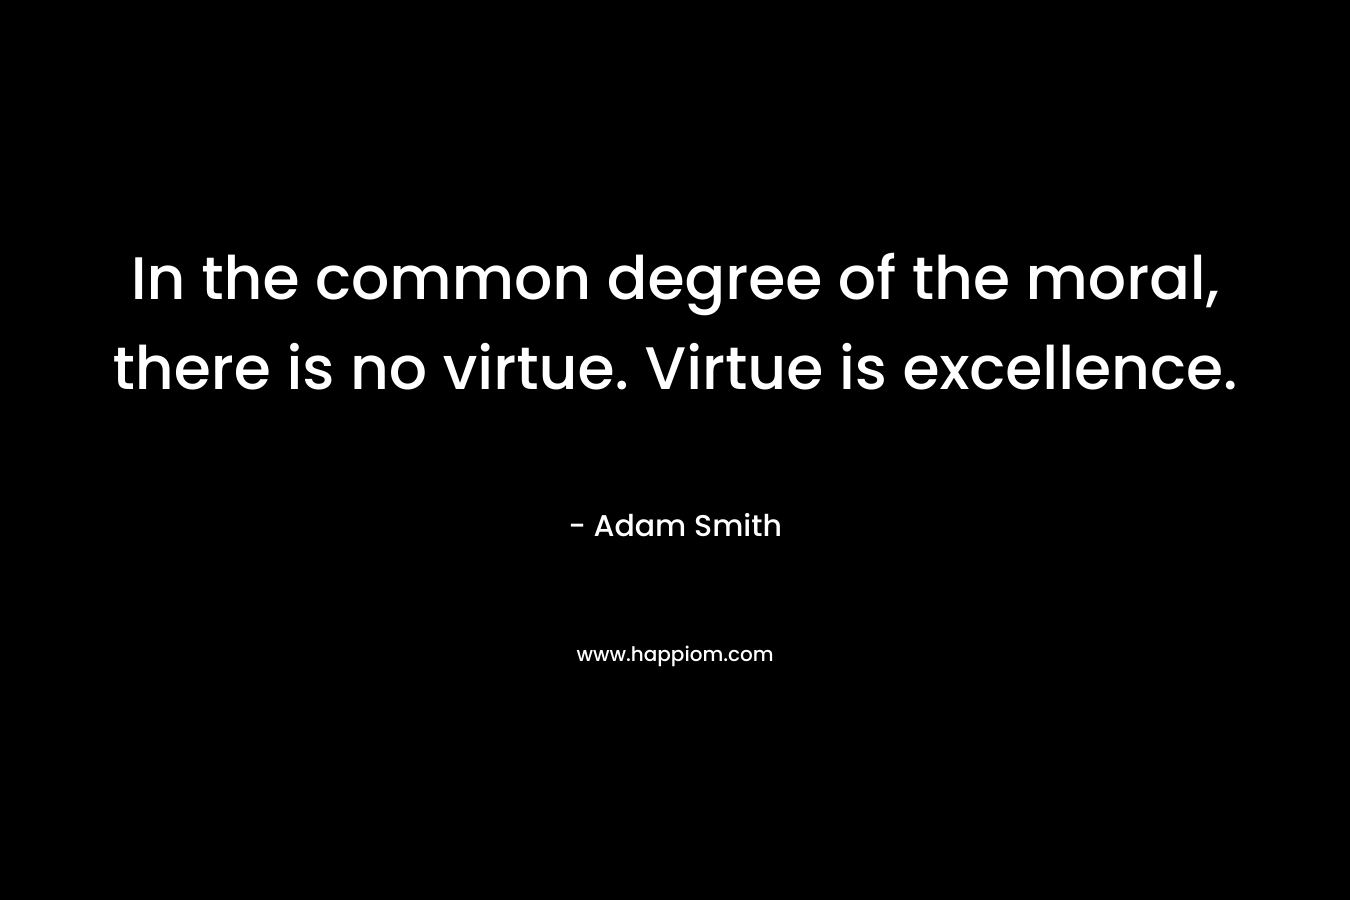 In the common degree of the moral, there is no virtue. Virtue is excellence.